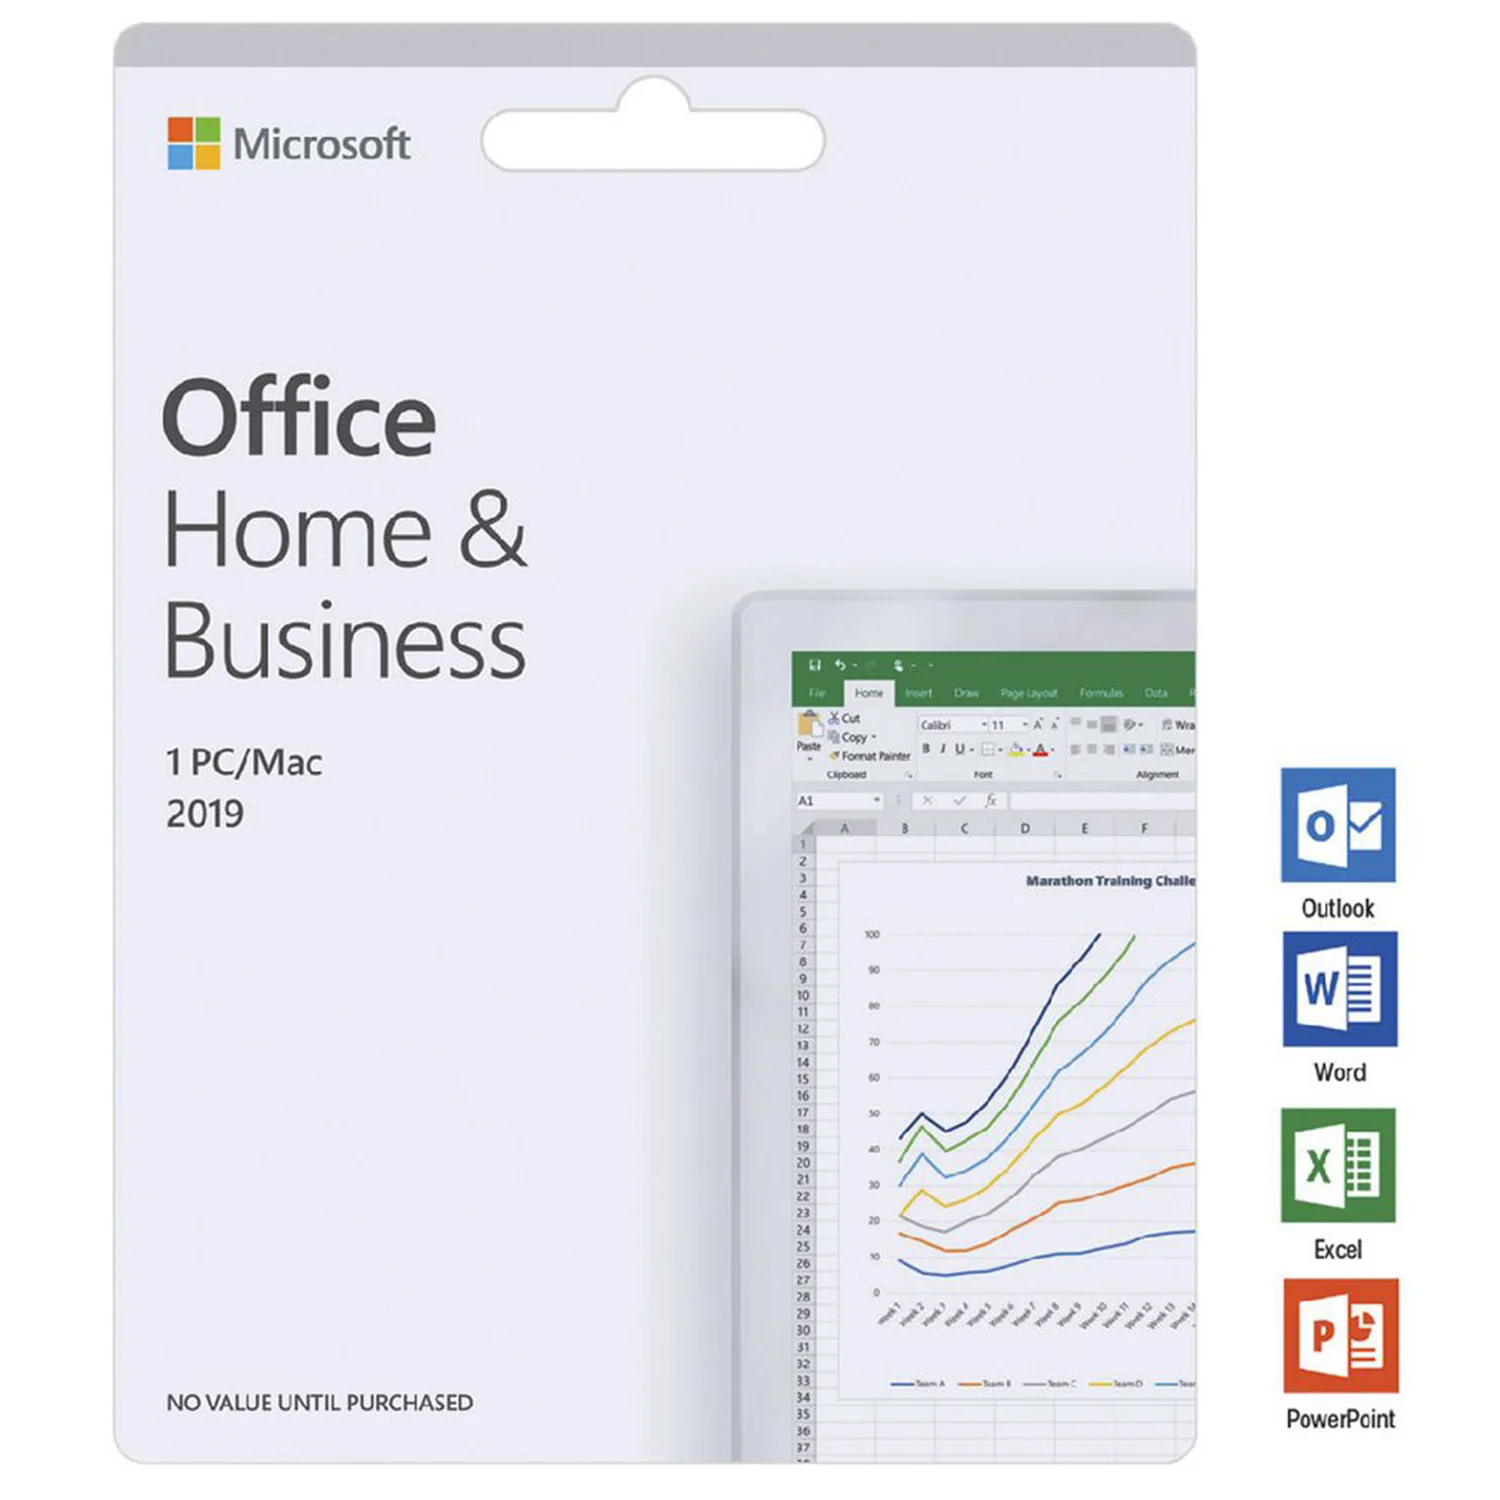 

Original edition Microsoft Office 2019 home and business for PC key Telephone activation license key